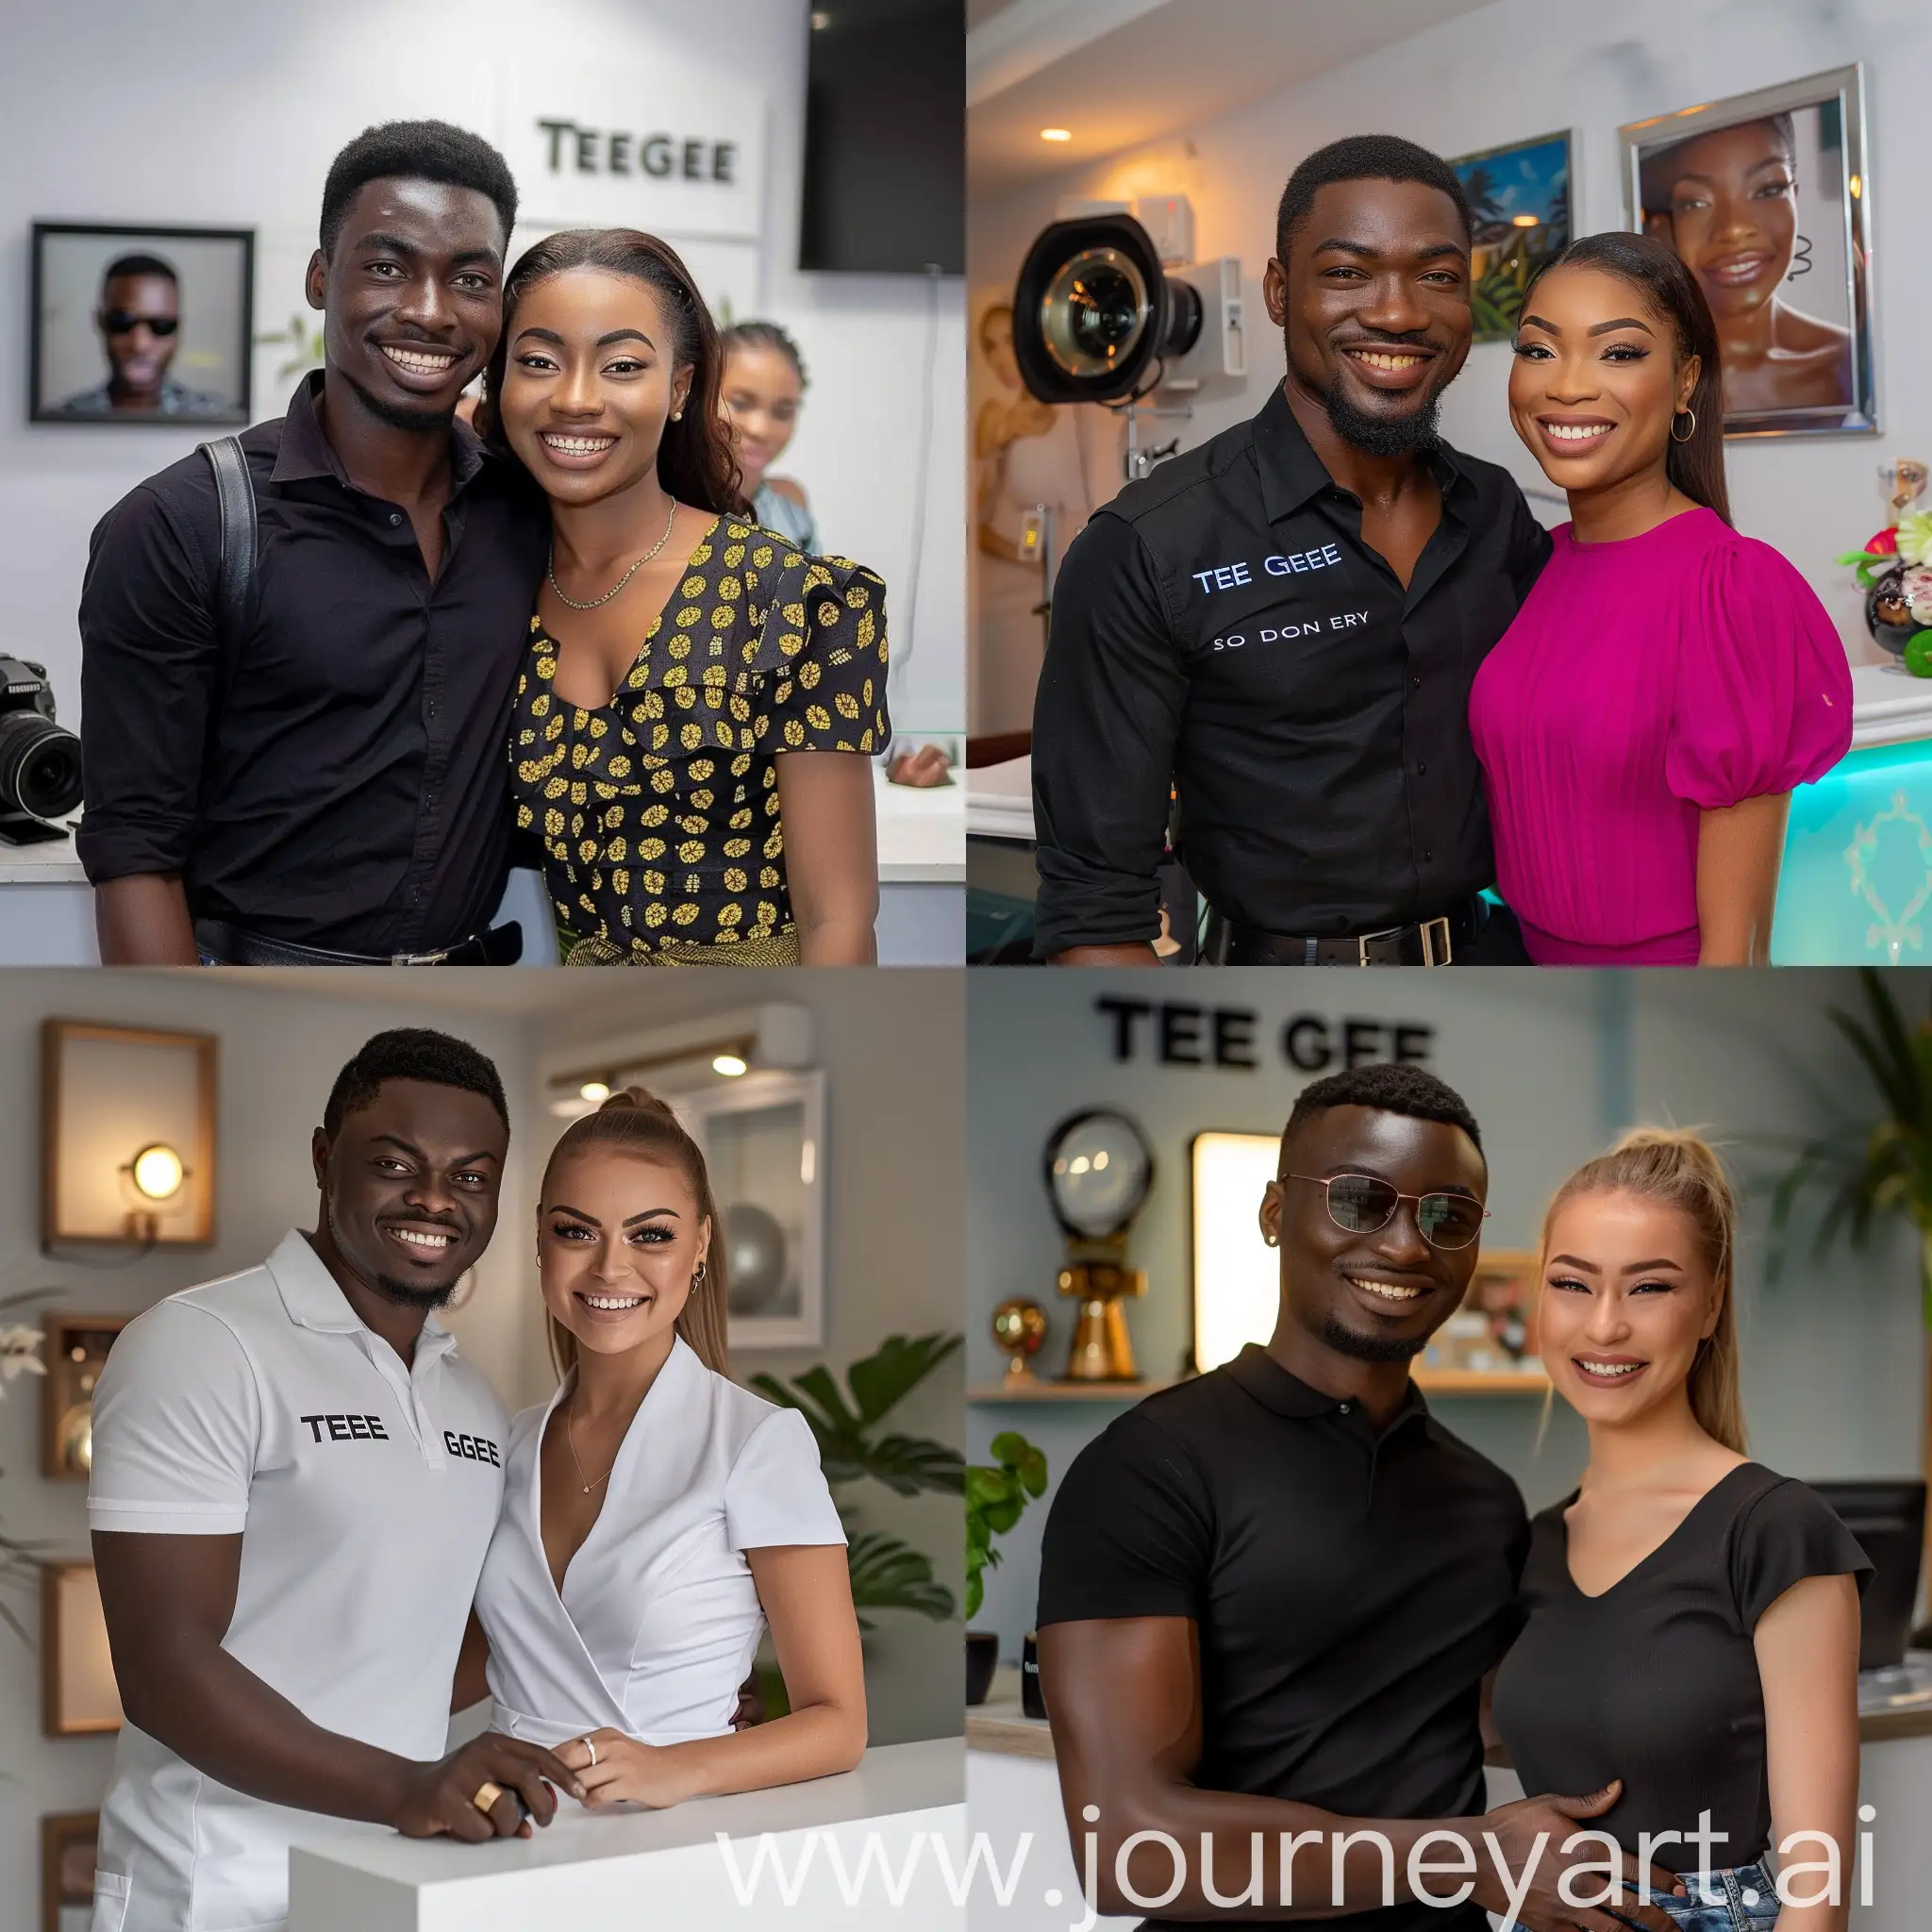 a picture of a photo studio reception with the caption"TeeGee Lens" on the reception wall, a Nigerian dark photographer and a fair receptionist smiling together